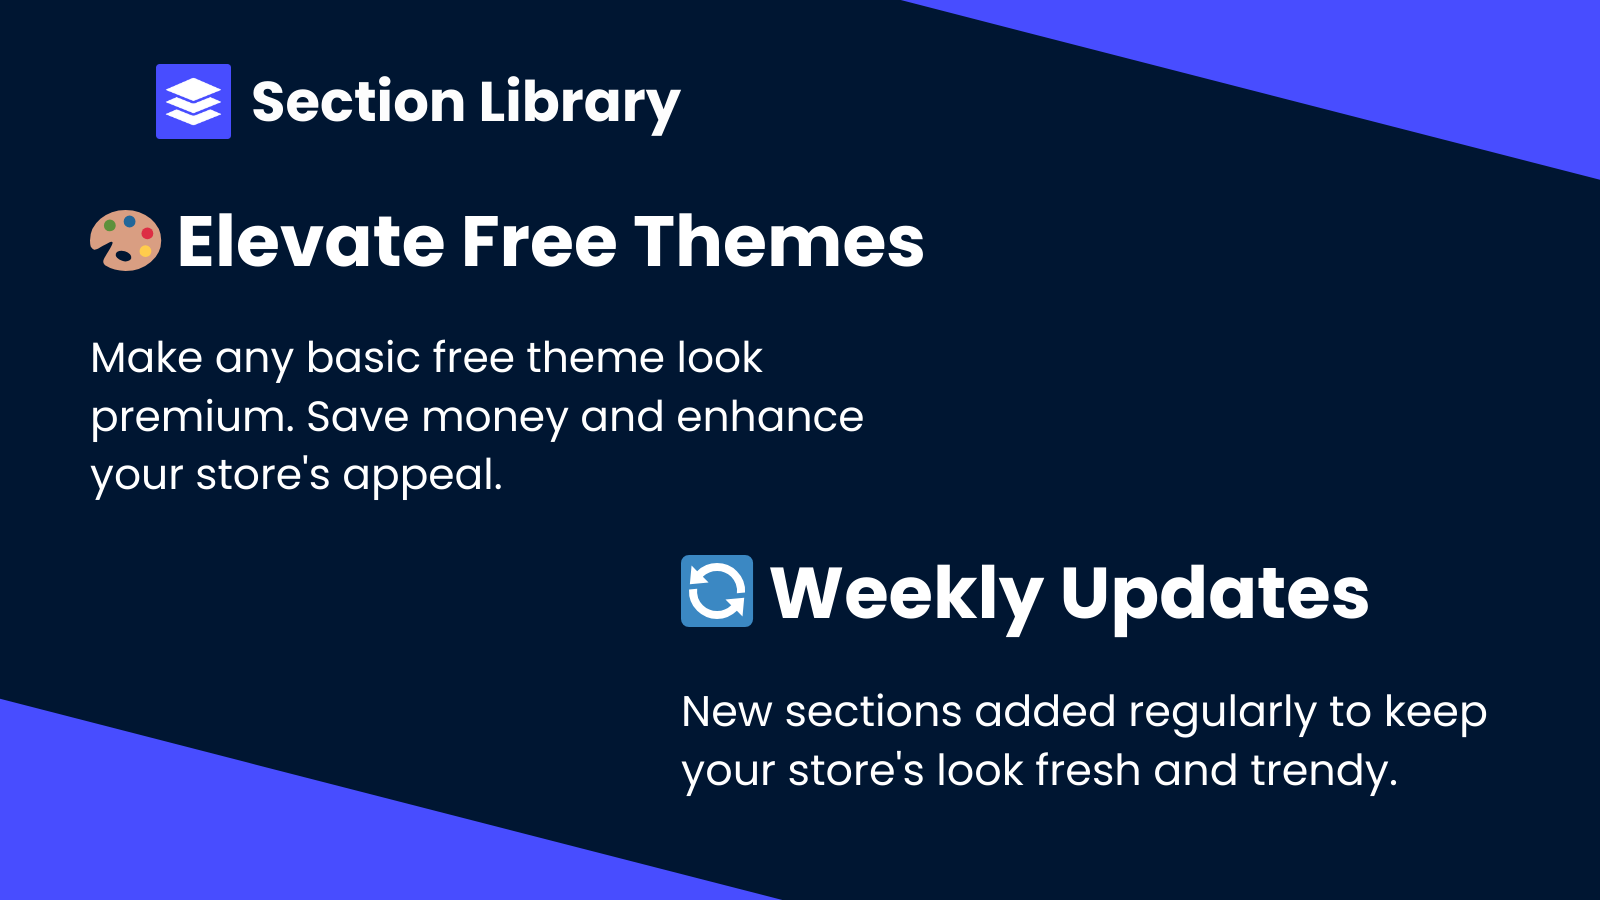 Two features of the app: Updates and Free Theme Boost